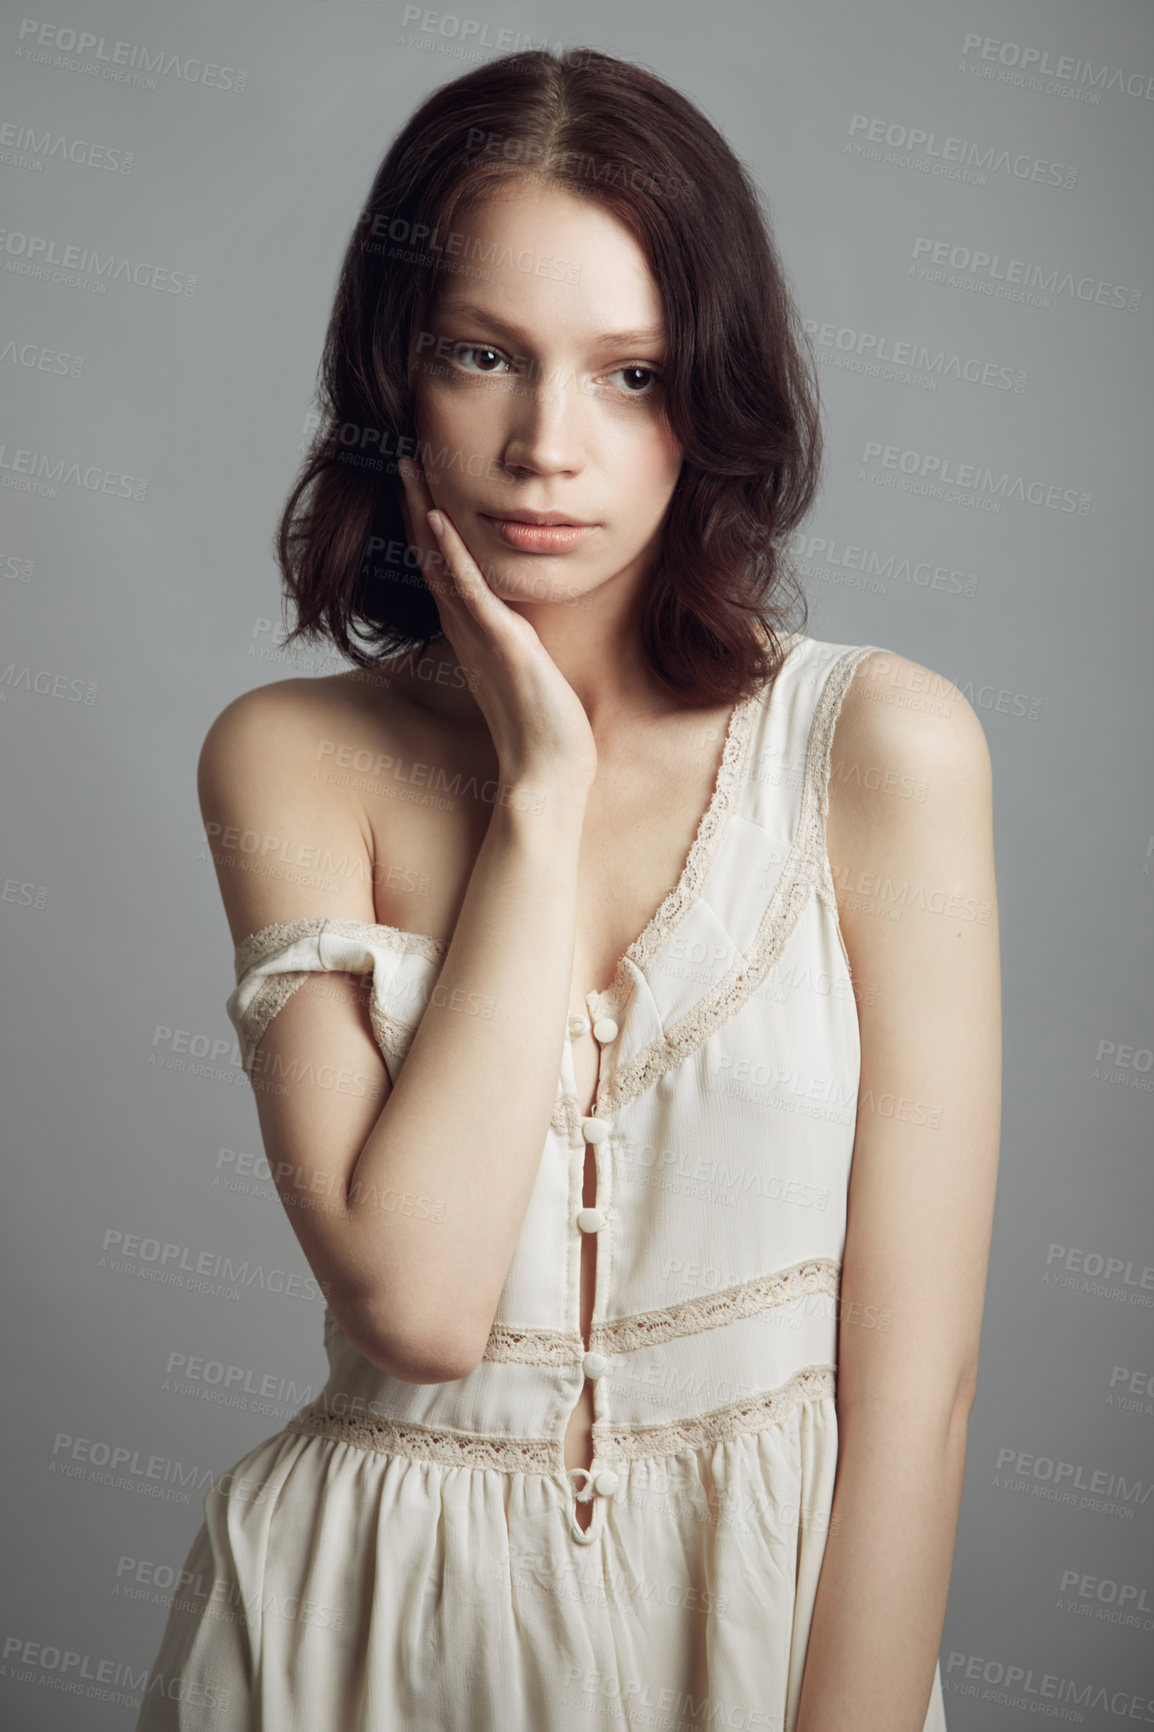 Buy stock photo Portrait of a beautiful young woman wearing vintage clothing and posing with hand on her cheek